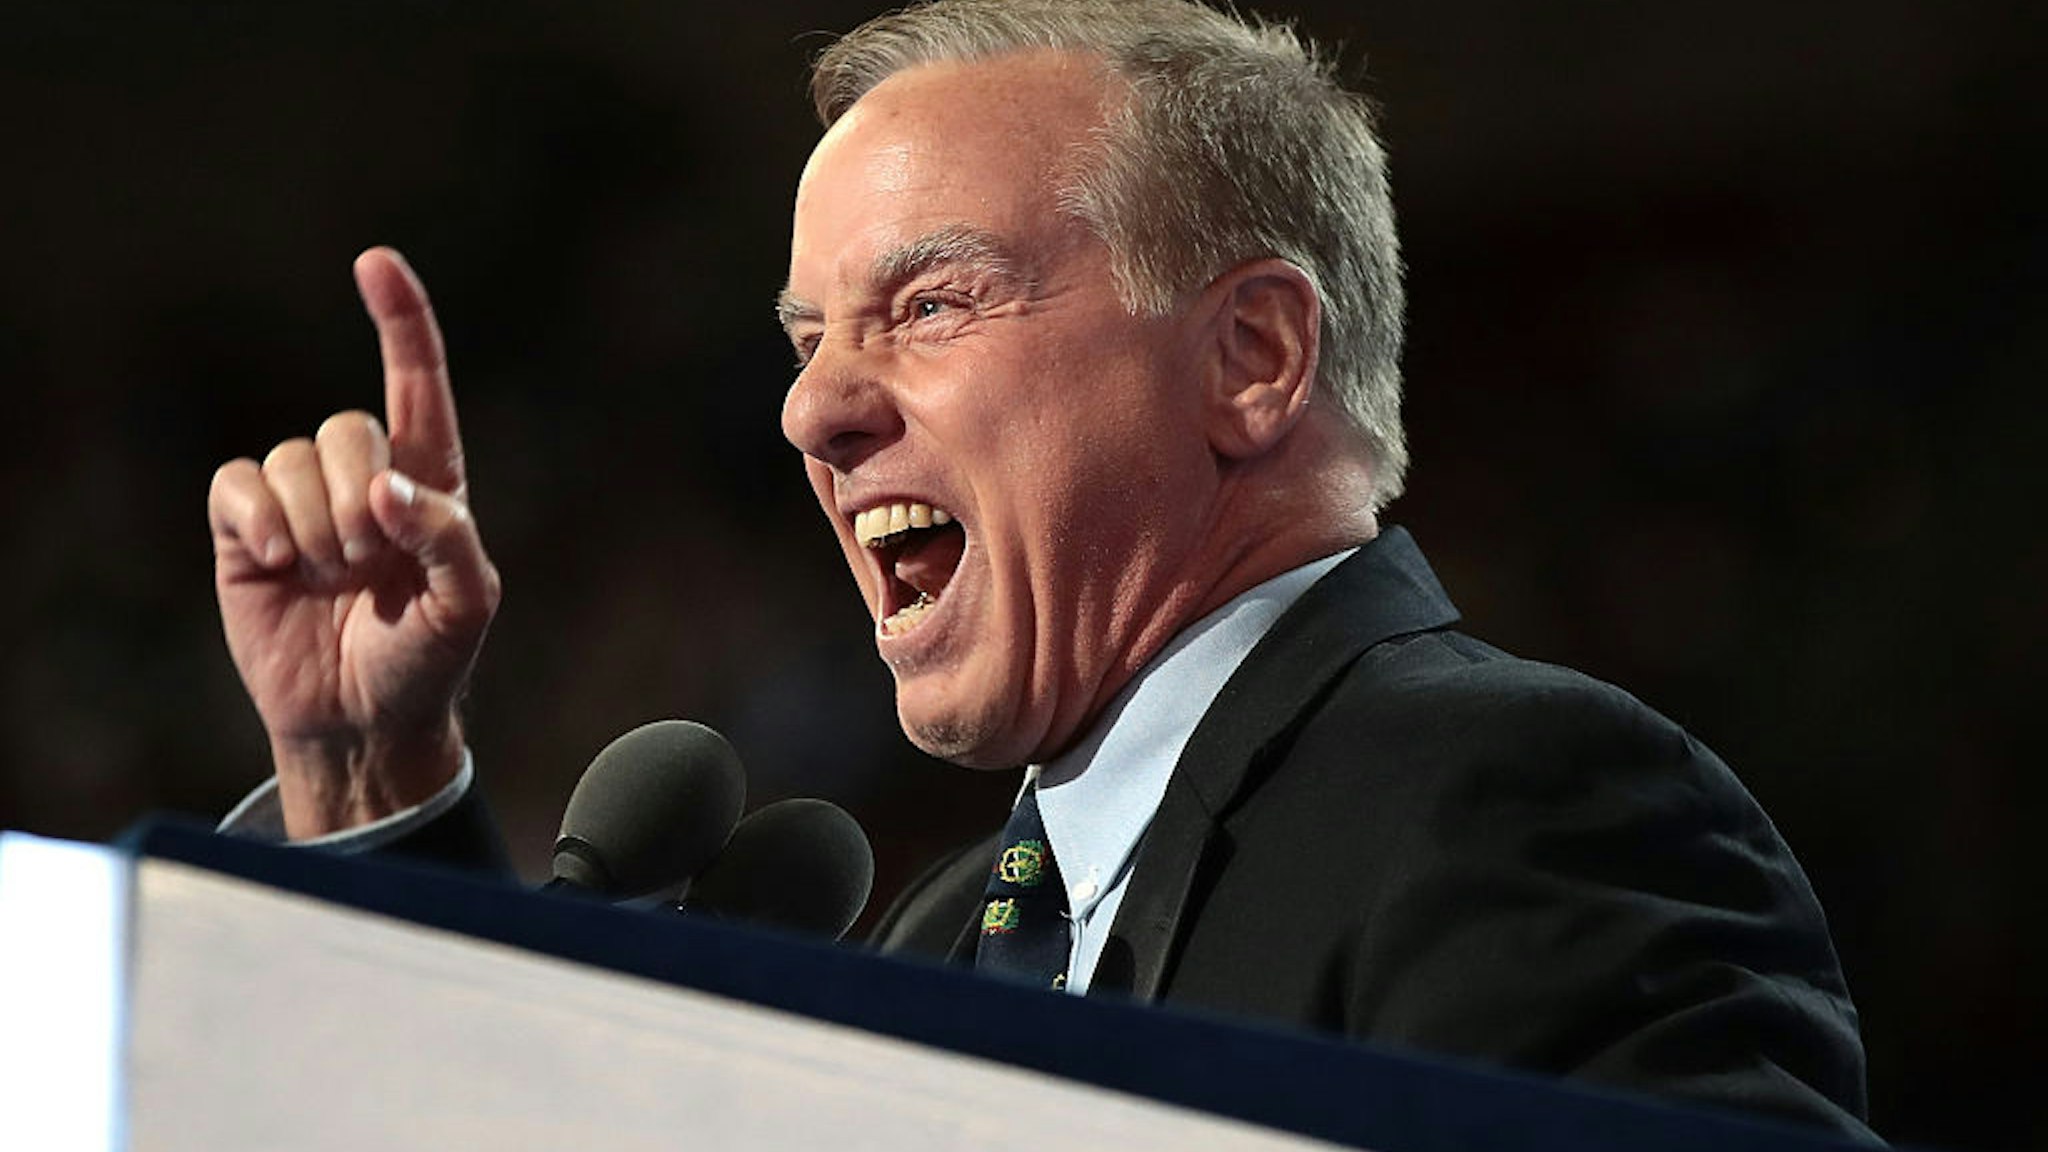 PHILADELPHIA, PA - JULY 26: Former Gov. Howard Dean (D-VT) reenacts his Iowa Caucus "Dean Scream" moment during closing remarks on the second day of the Democratic National Convention at the Wells Fargo Center, July 26, 2016 in Philadelphia, Pennsylvania. Democratic presidential candidate Hillary Clinton received the number of votes needed to secure the party's nomination. An estimated 50,000 people are expected in Philadelphia, including hundreds of protesters and members of the media. The four-day Democratic National Convention kicked off July 25. (Photo by Drew Angerer/Getty Images)